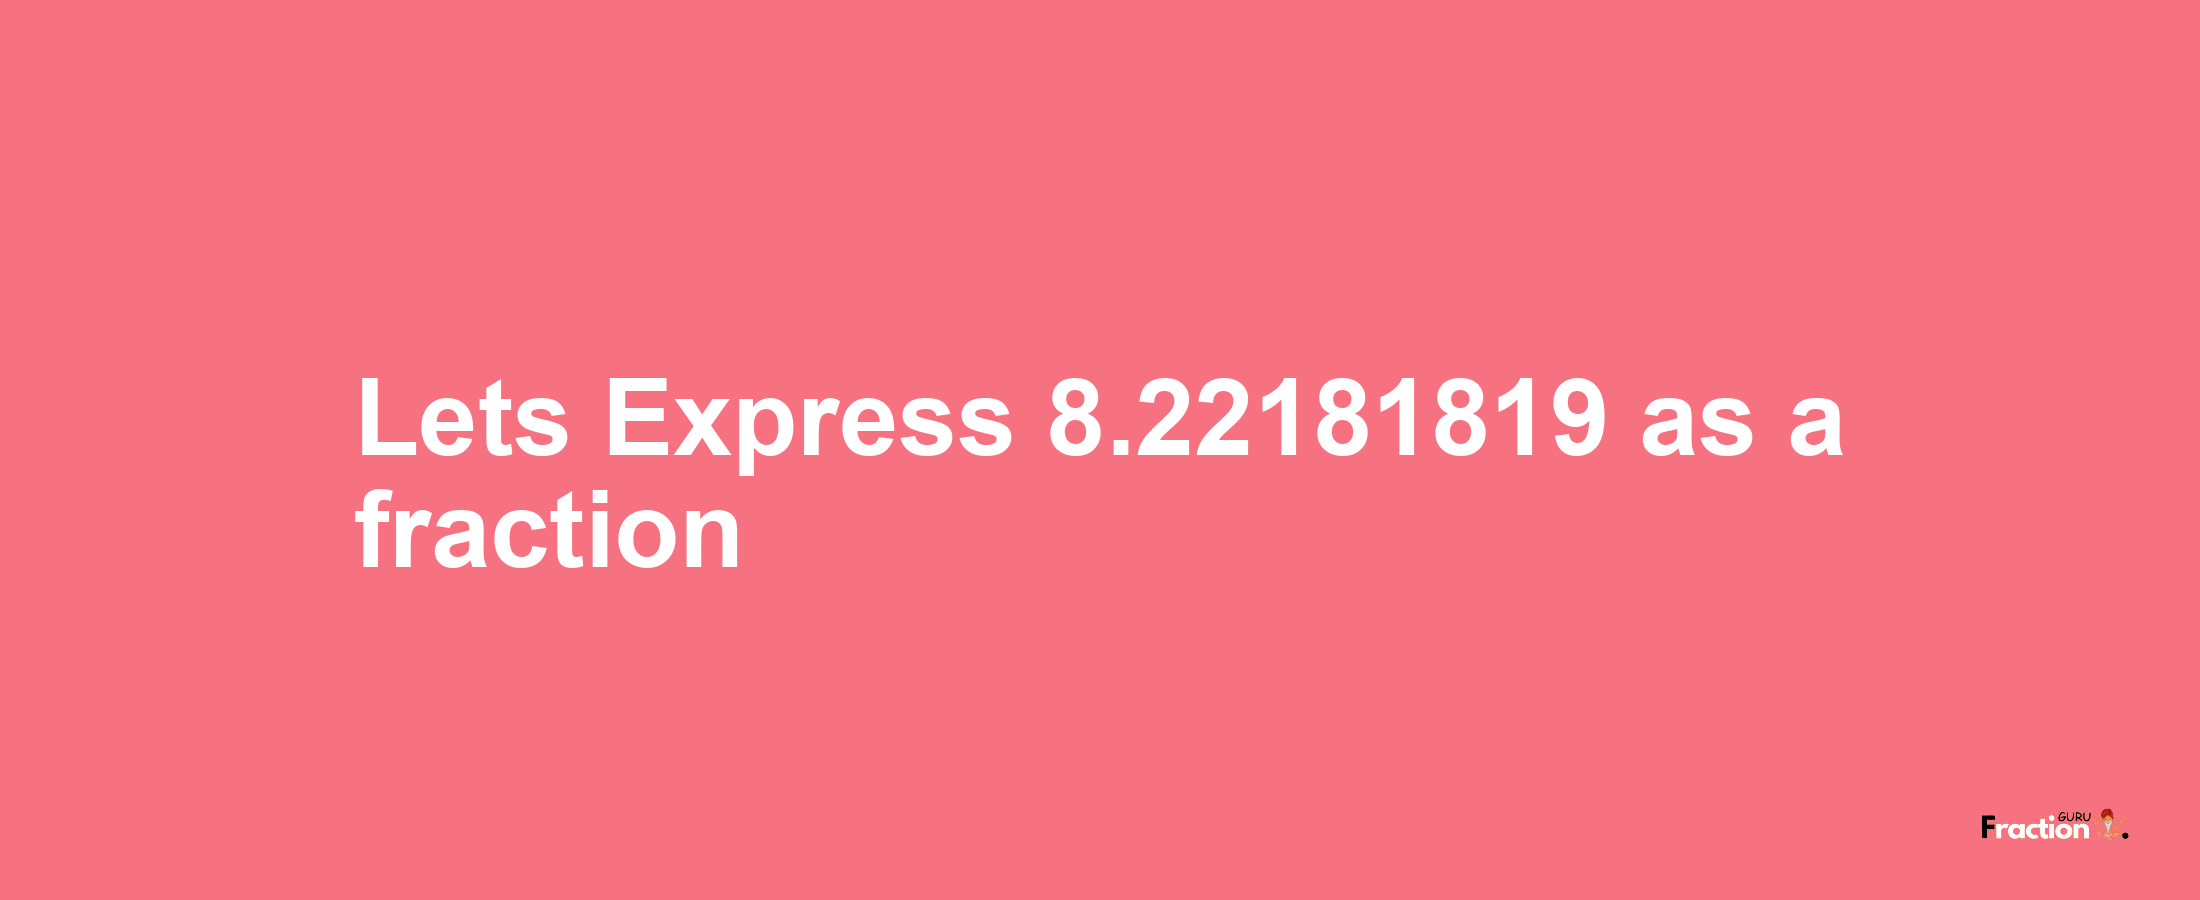 Lets Express 8.22181819 as afraction